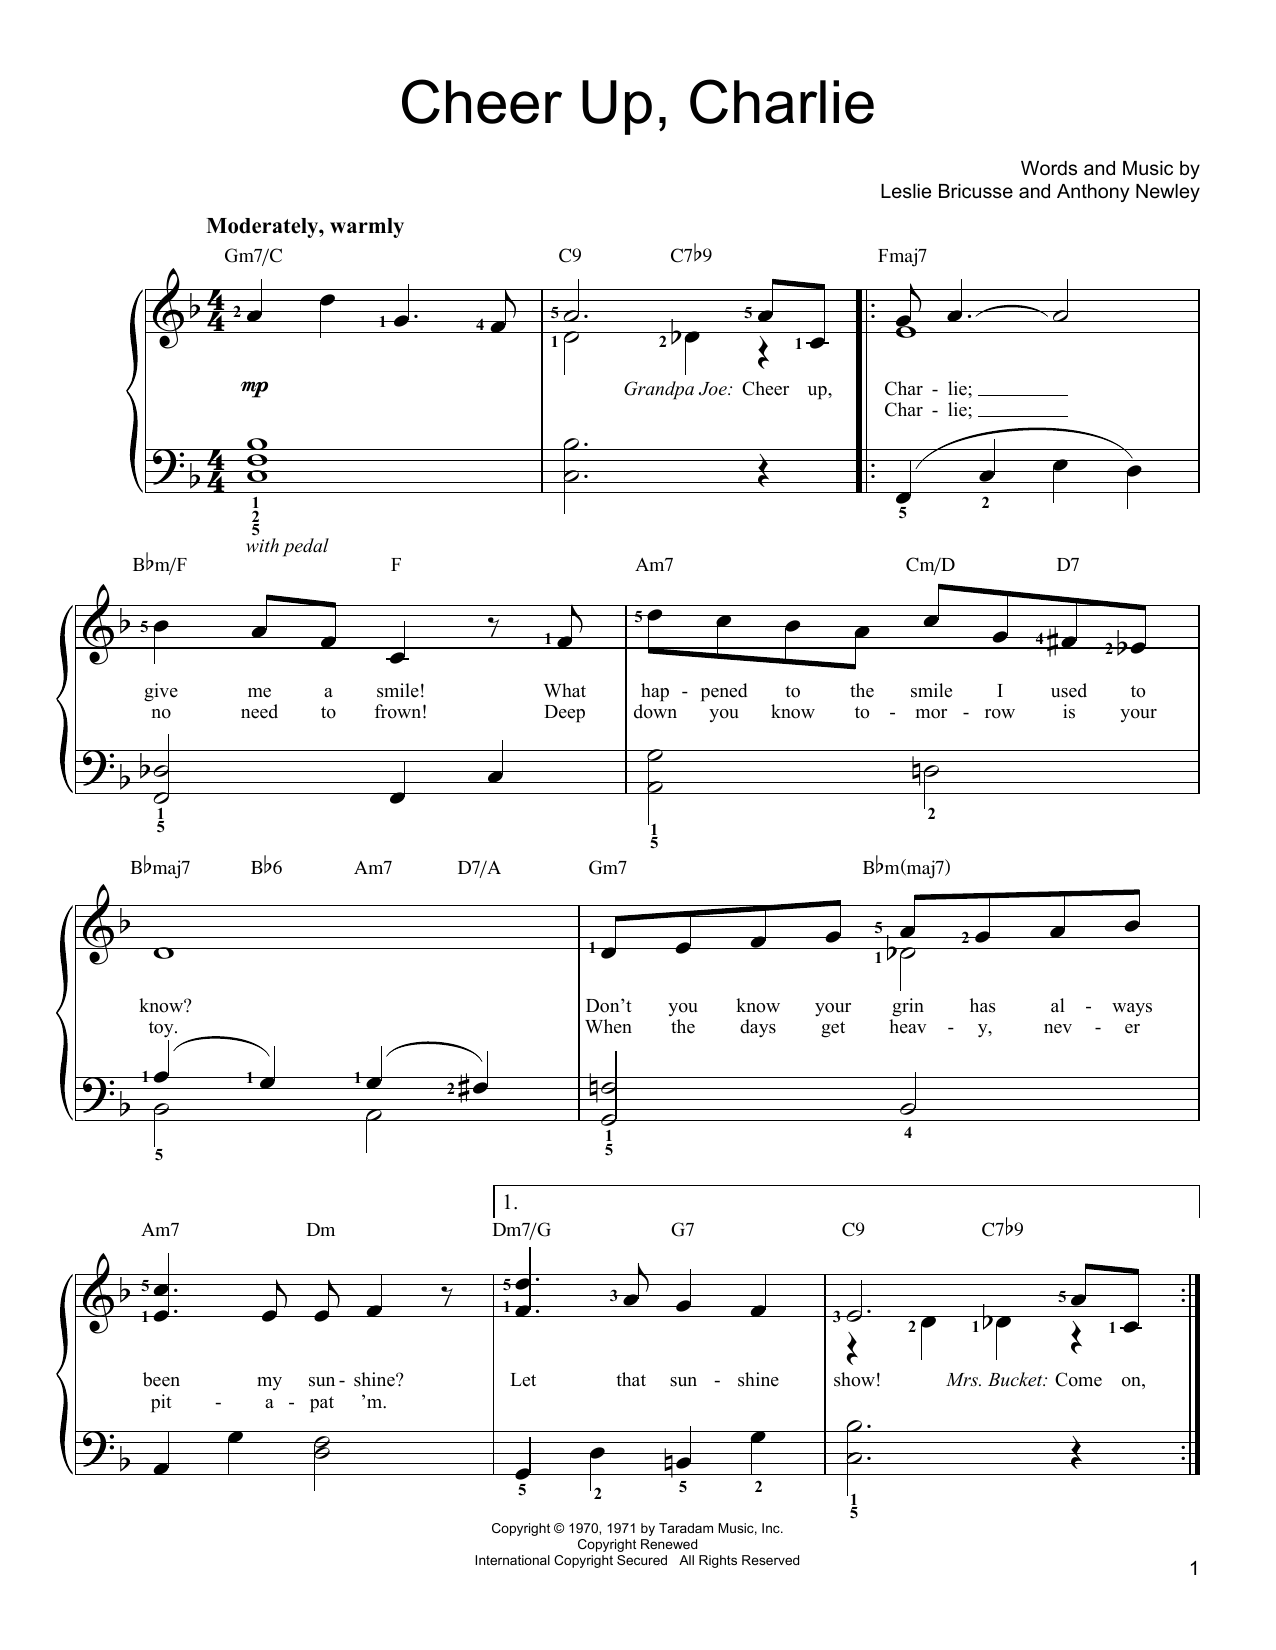 Anthony Newley Cheer Up, Charlie sheet music notes and chords. Download Printable PDF.